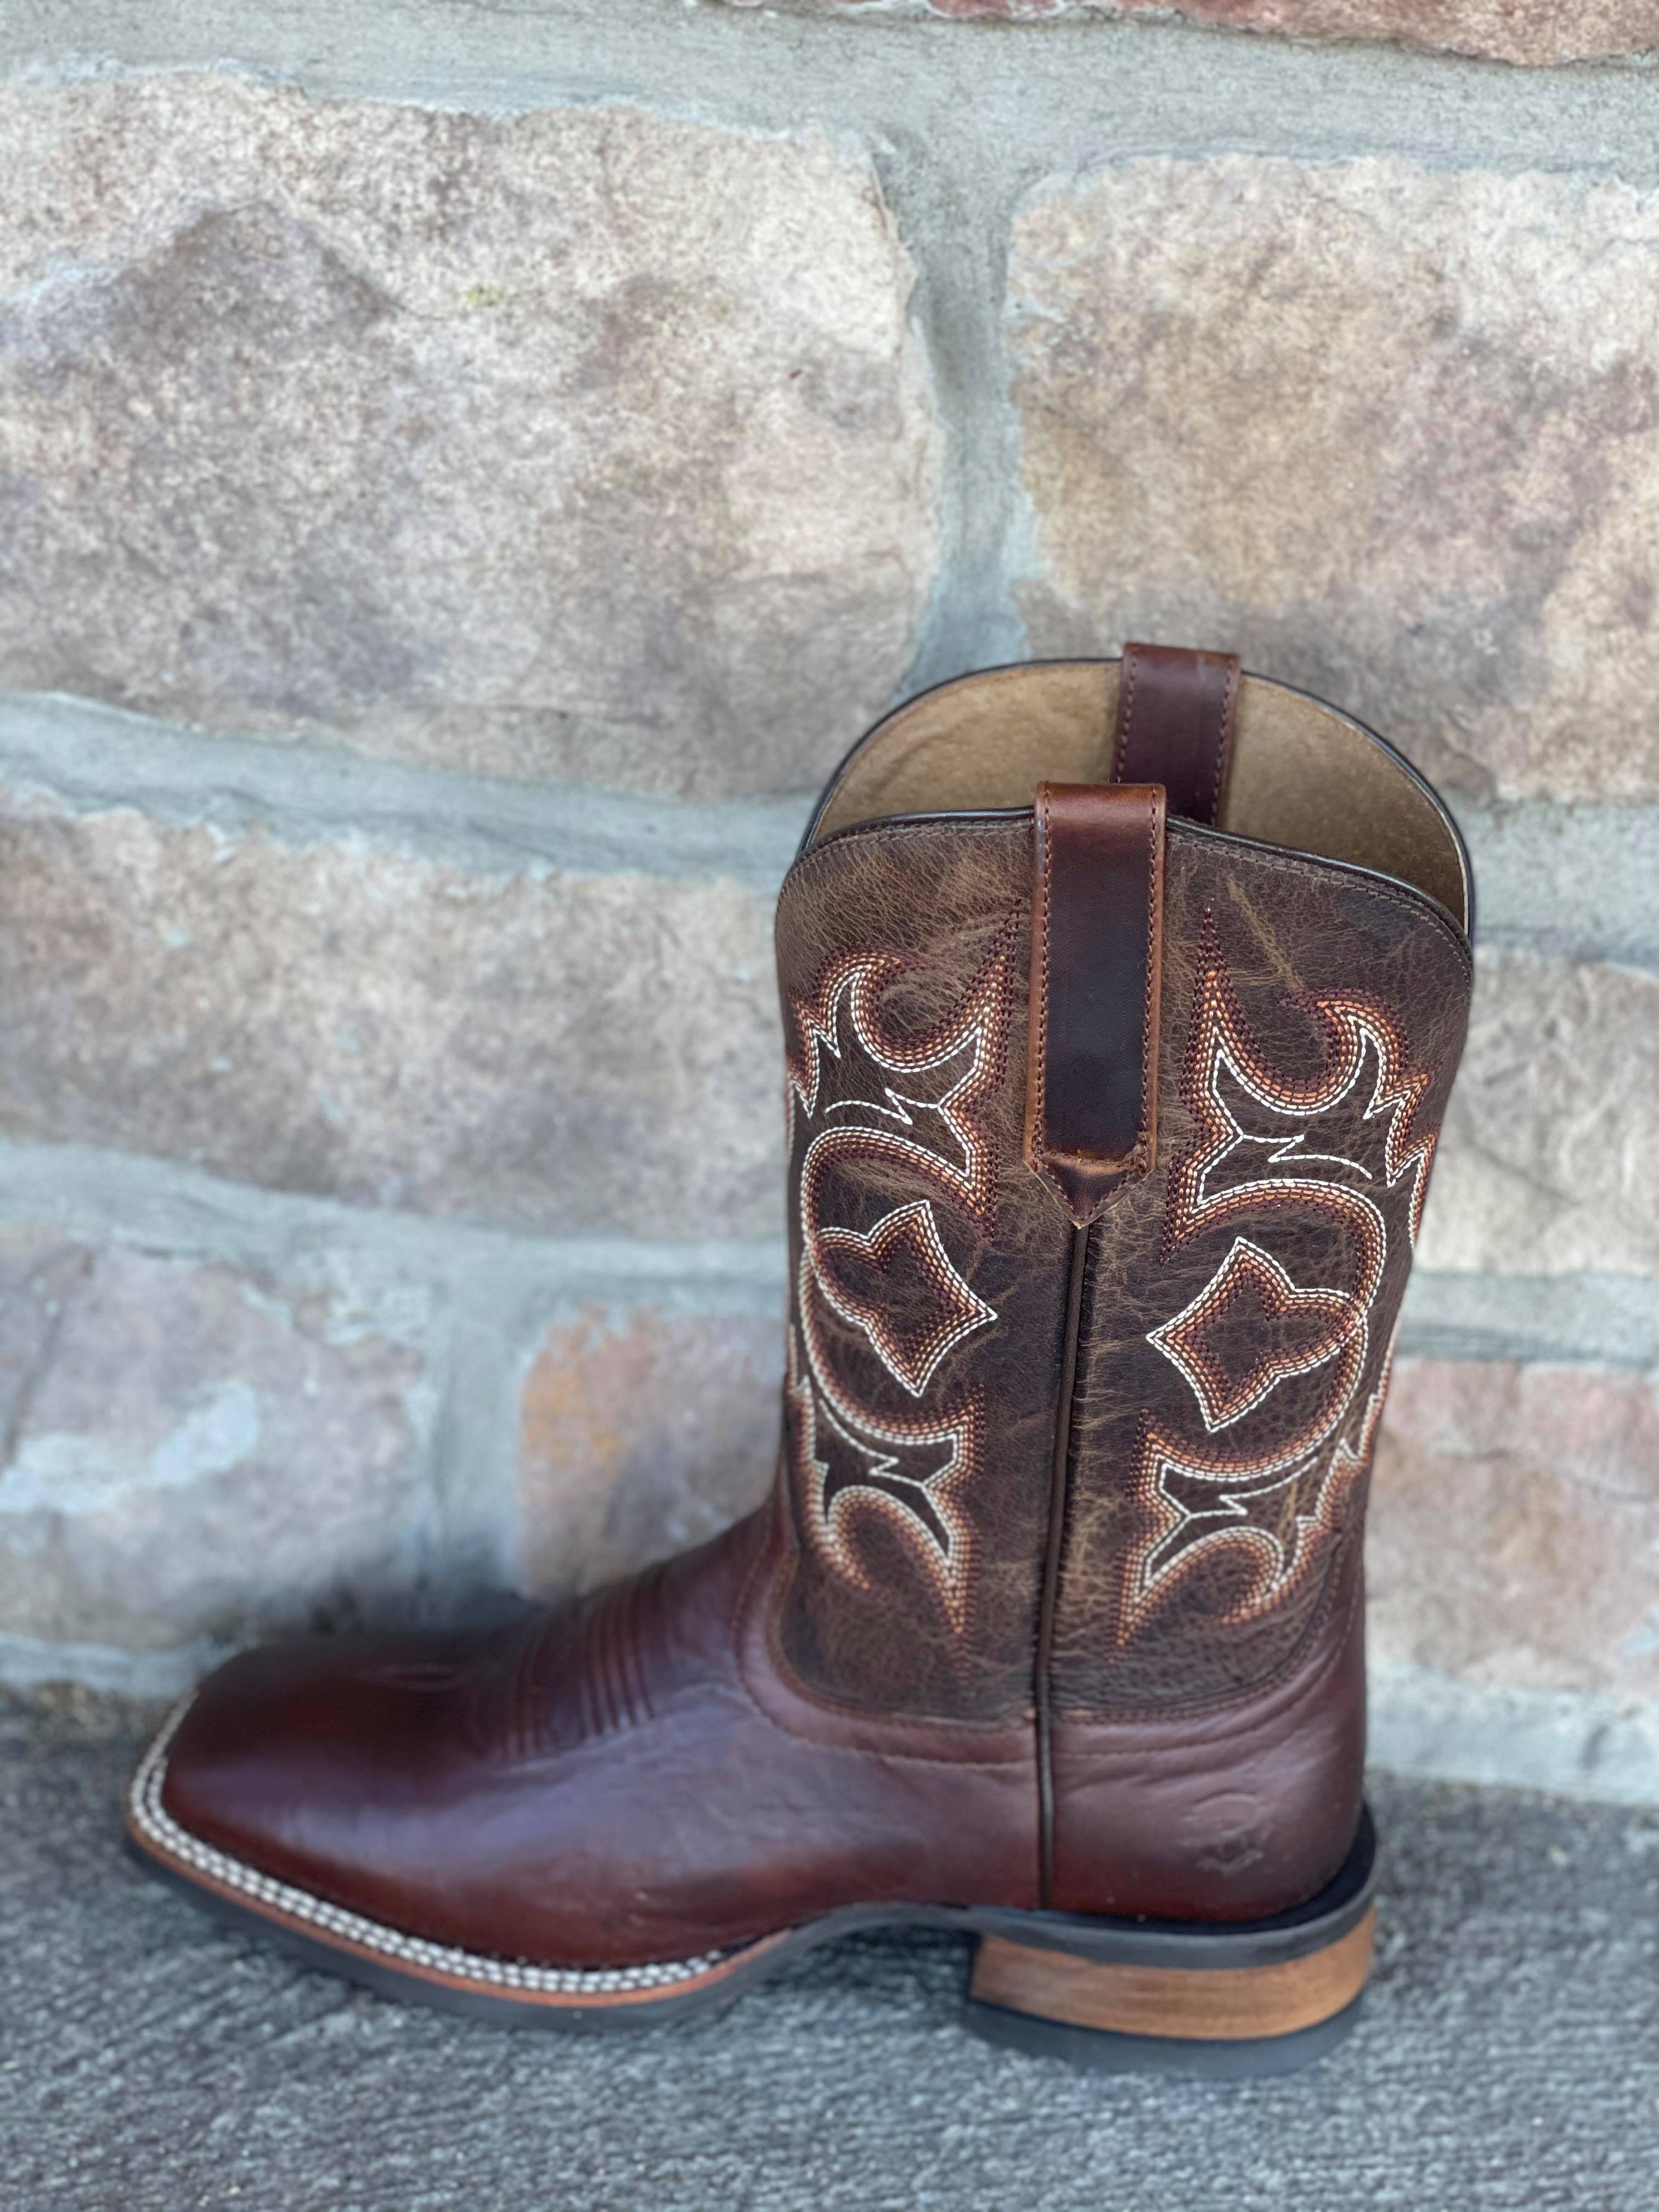 Men's Ariat Relentless High Call-Men's Boots-Ariat-Lucky J Boots & More, Women's, Men's, & Kids Western Store Located in Carthage, MO